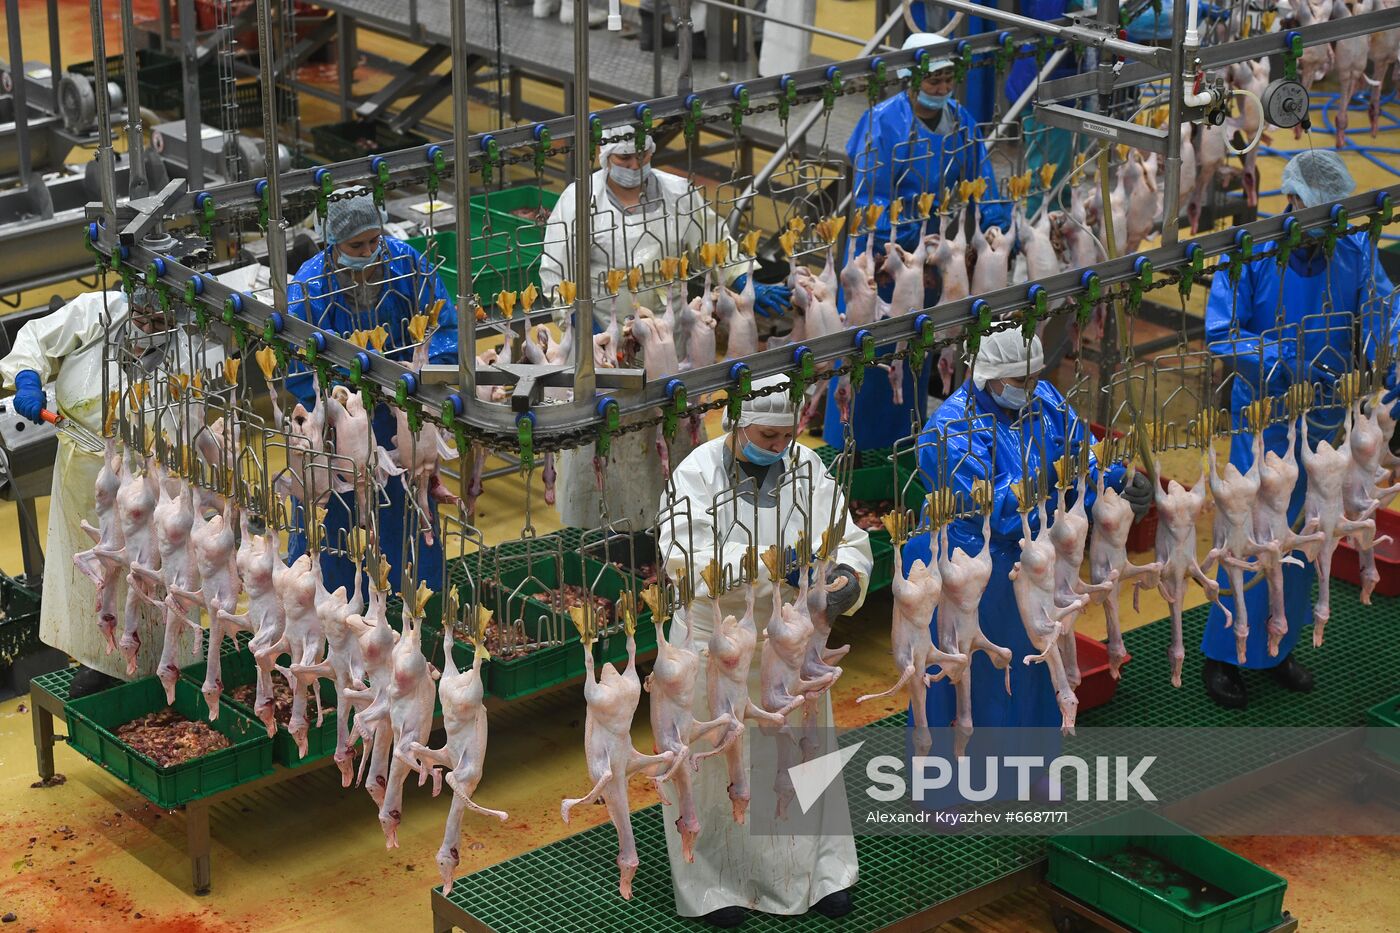 Russia Agriculture Poultry